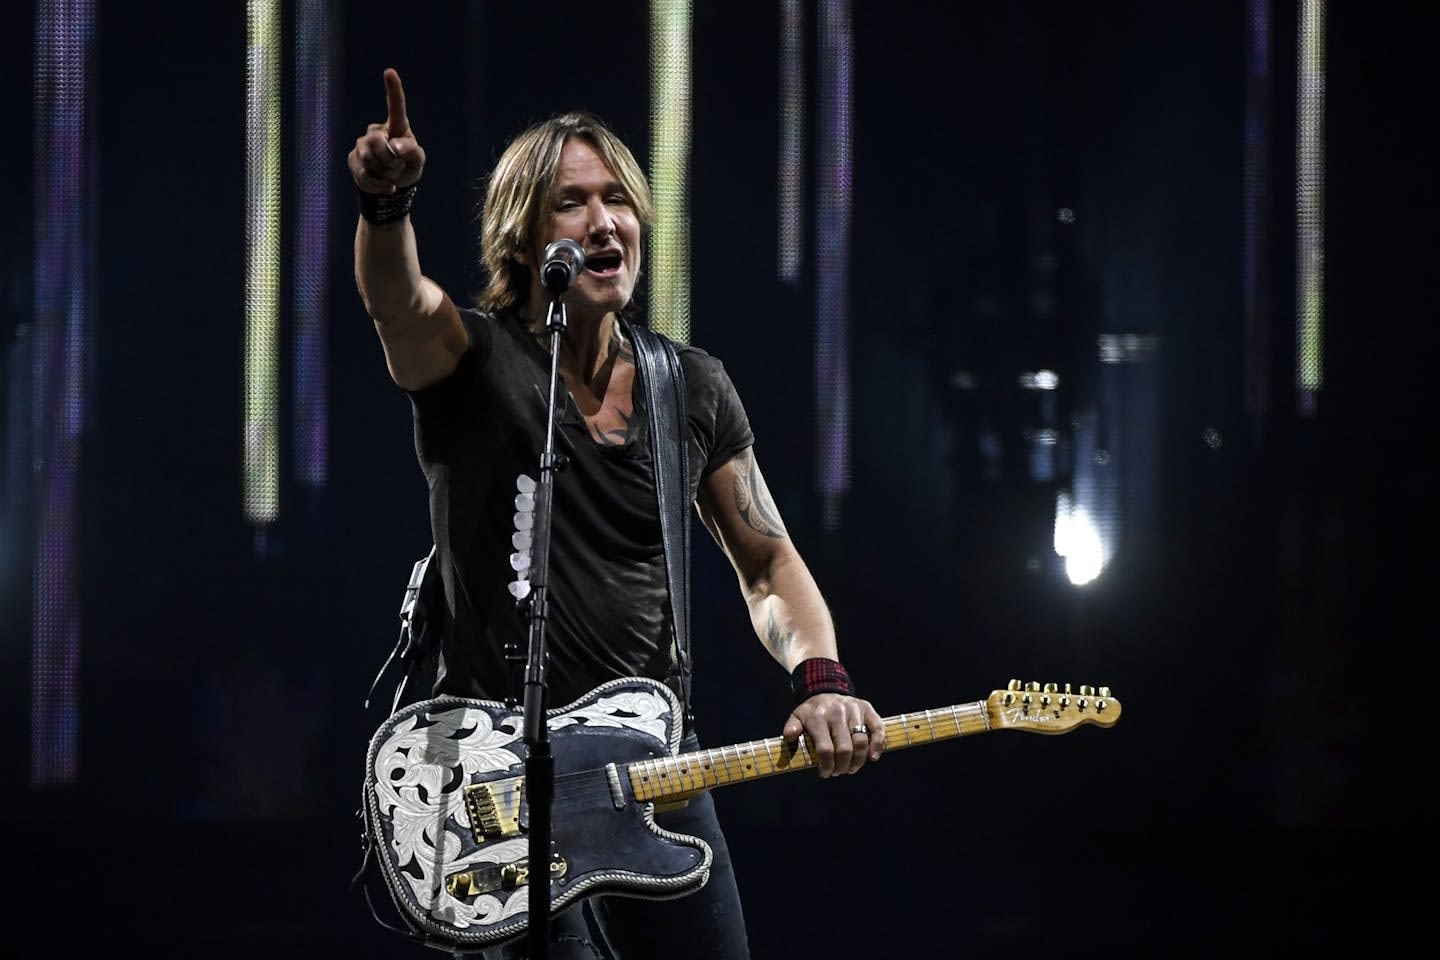 Surprise! Keith Urban announces underplay club gig Sunday at Fine Line in Minneapolis